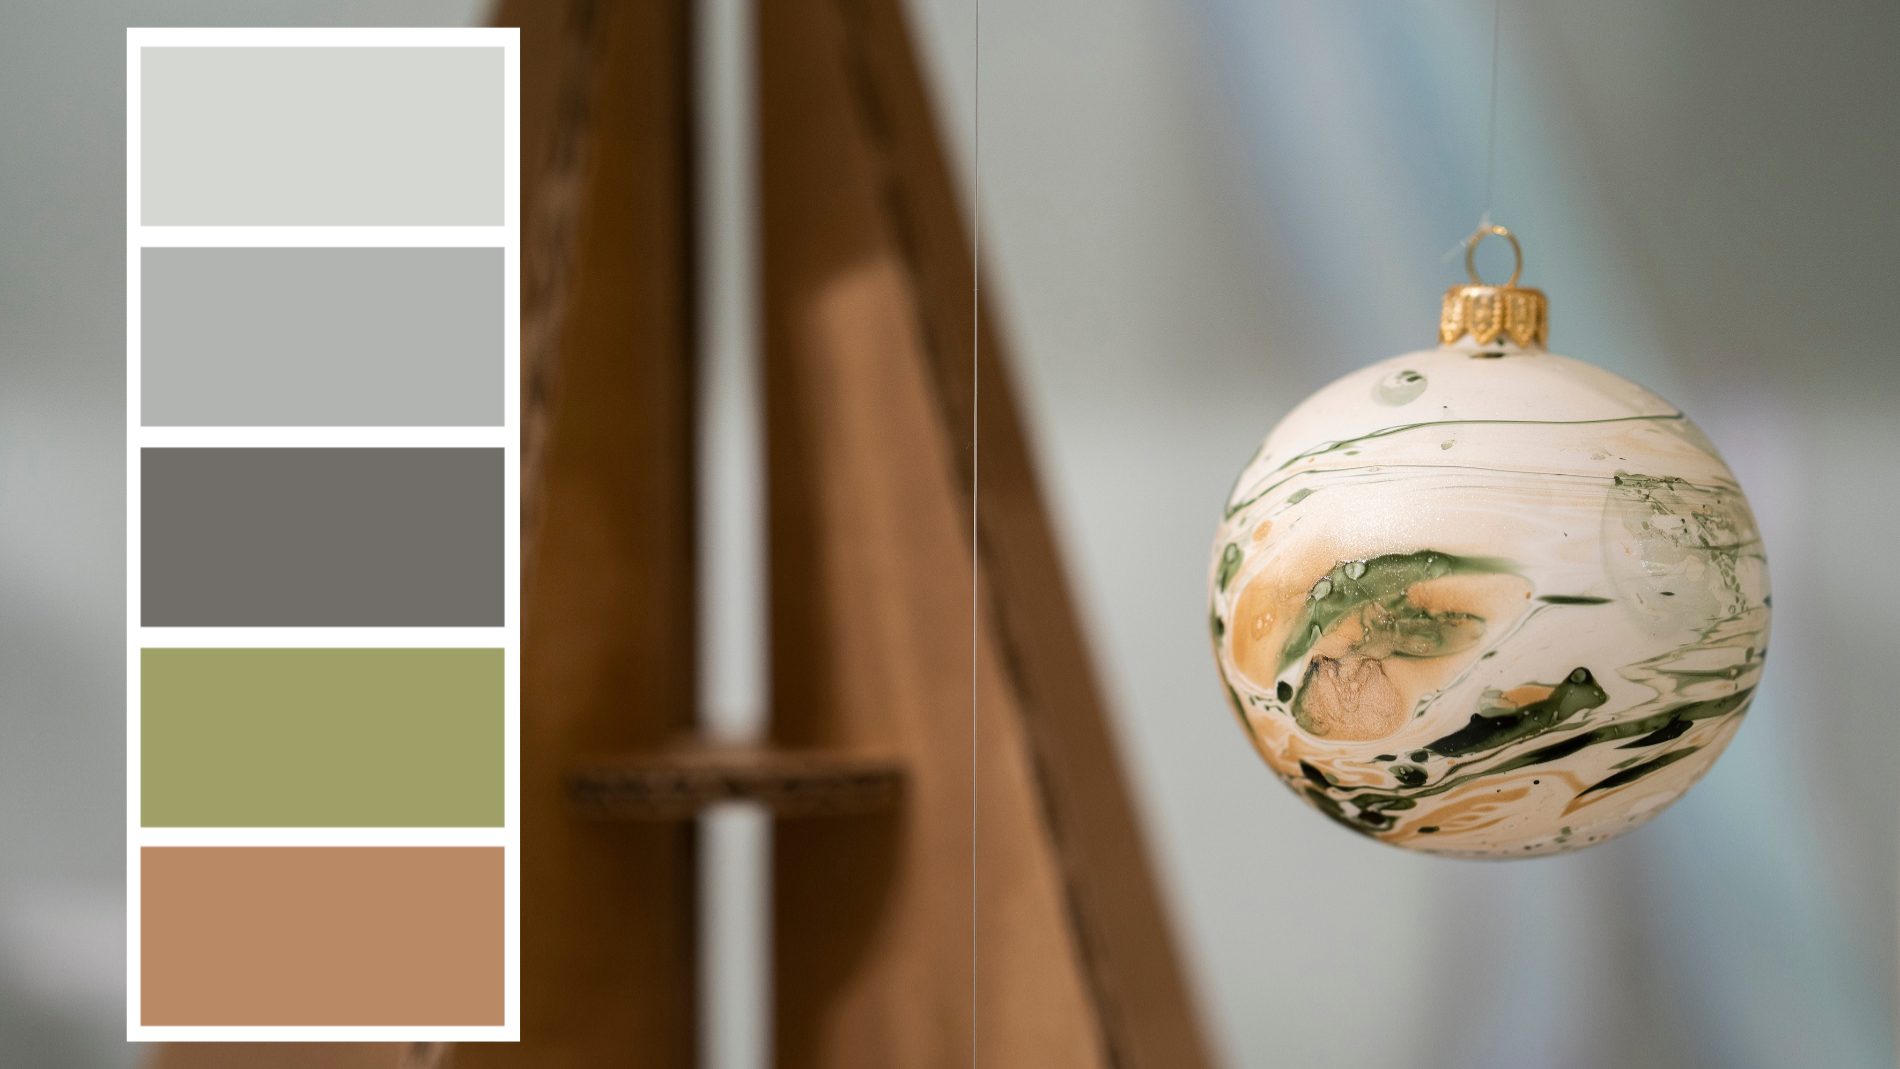 Shades of nature: from white sand to stone grey to dark rock. Three warm tones - rich moss green, woody rose tone and soft rosé